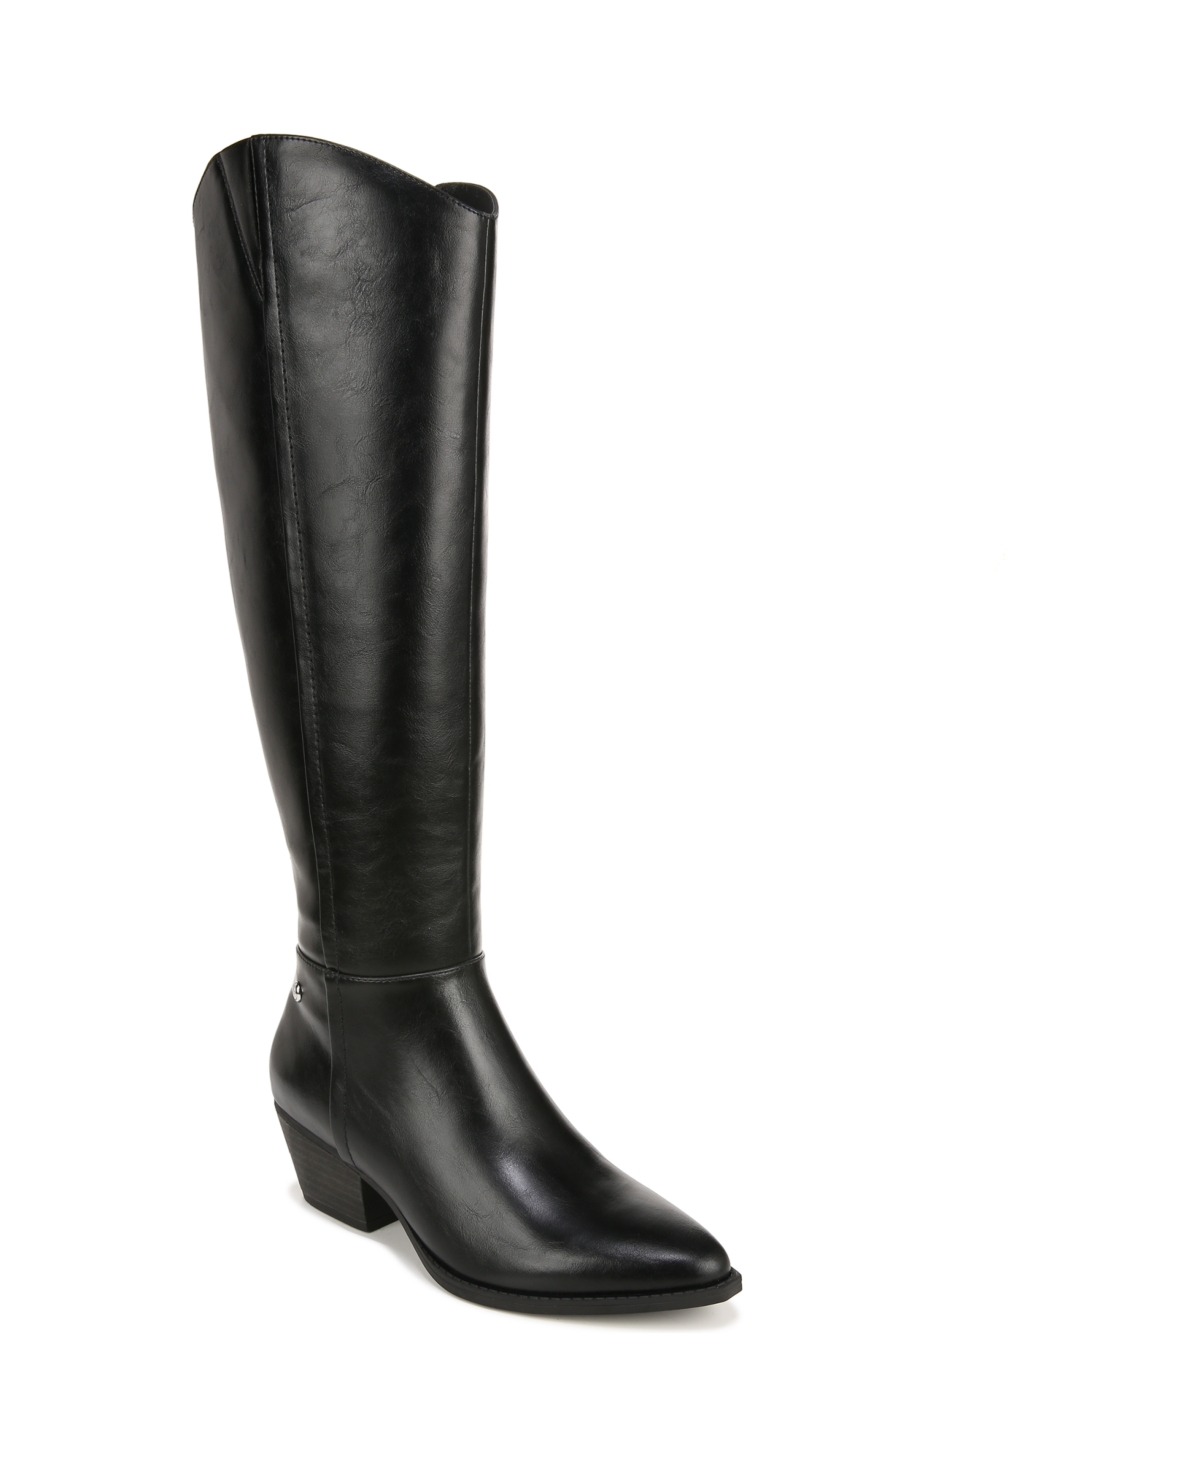 Reese Knee High Boots - Chestnut Faux Leather